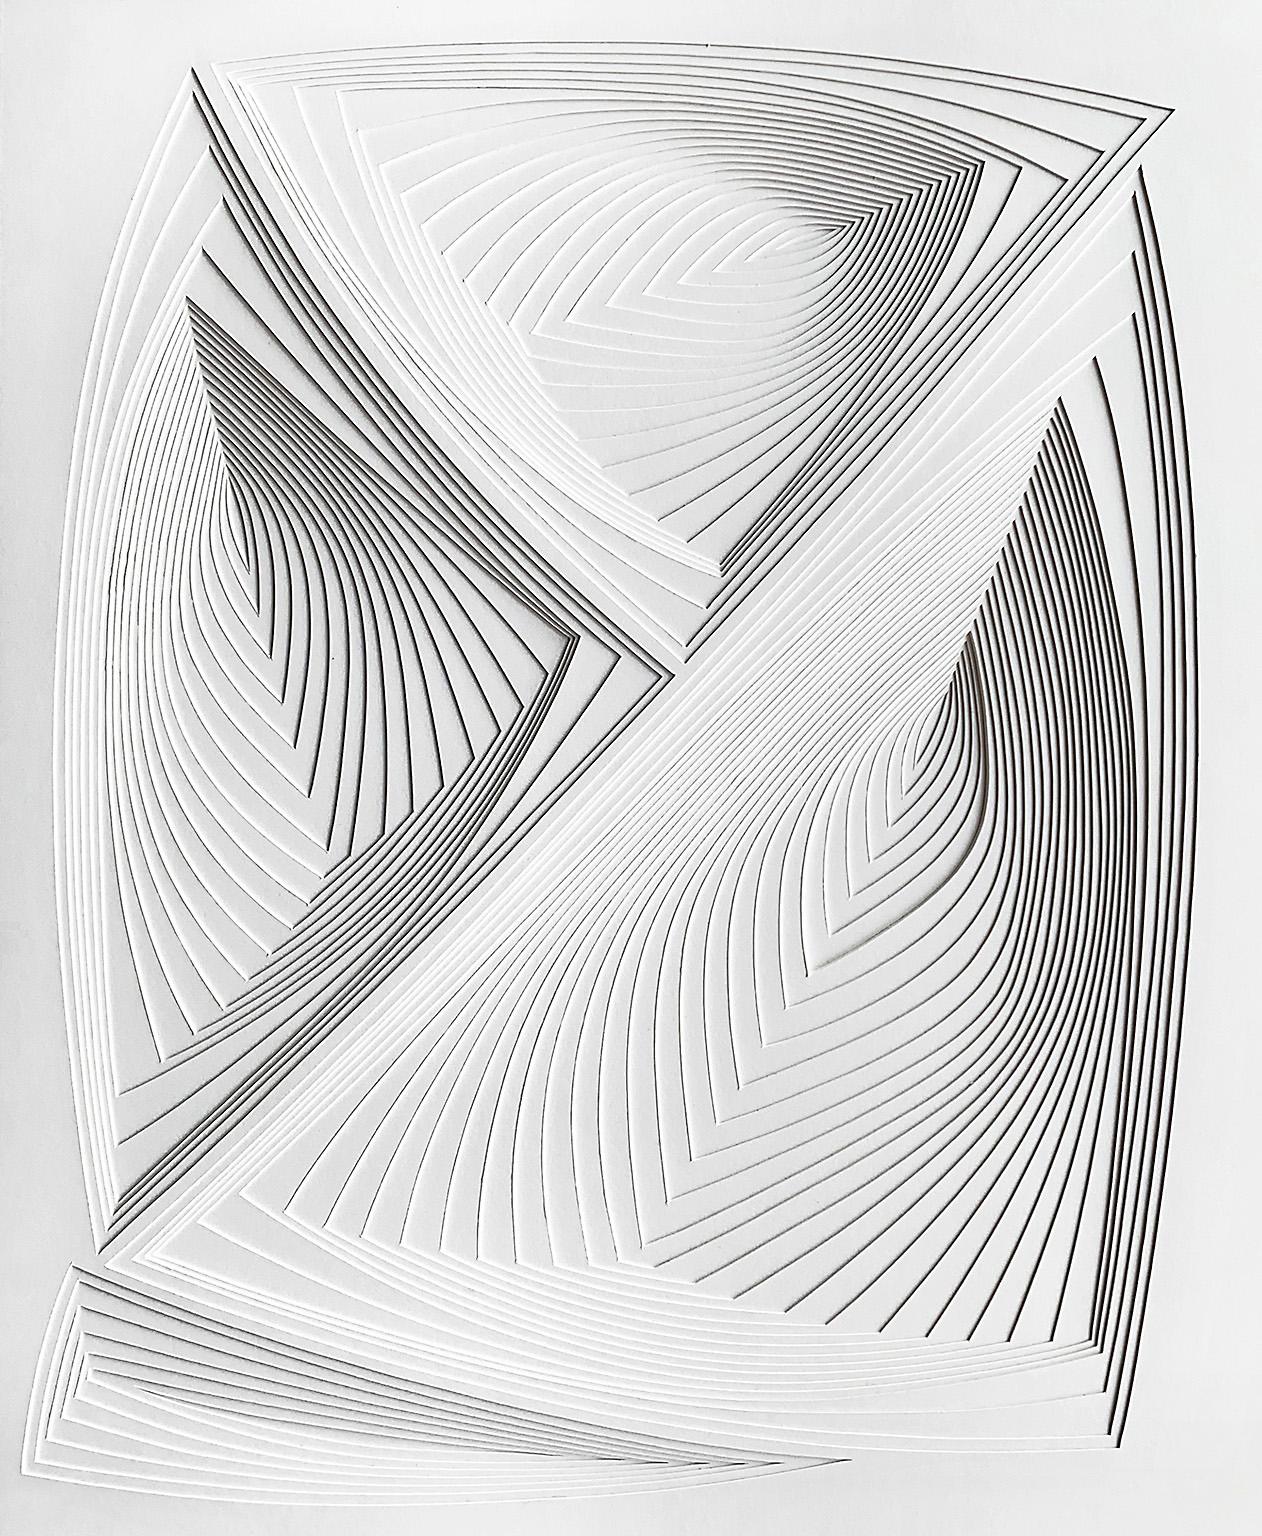 Elizabeth Gregory-Gruen Abstract Sculpture - "All Over #1", Free Hand Cut Paper Wall Relief Sculpture, Abstract, Tonal, White